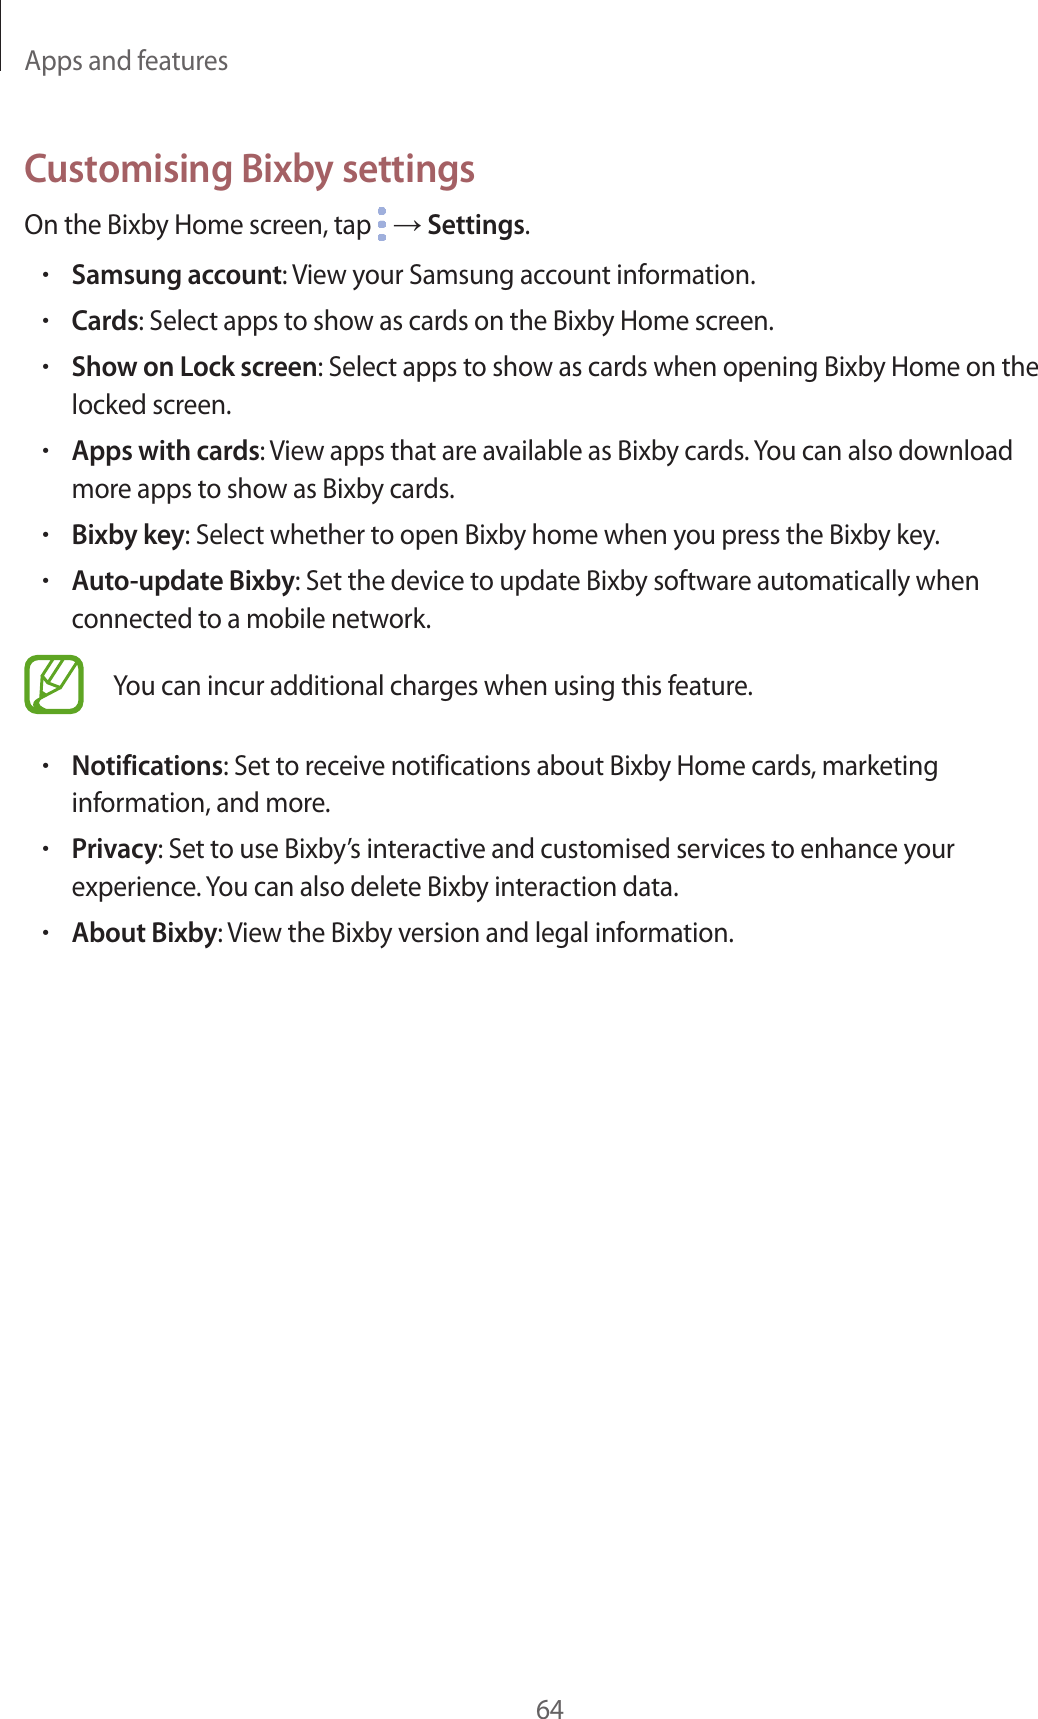 Apps and features64Customising Bixby settingsOn the Bixby Home screen, tap   → Settings.•Samsung account: View your Samsung account information.•Cards: Select apps to show as cards on the Bixby Home screen.•Show on Lock screen: Select apps to show as cards when opening Bixby Home on the locked screen.•Apps with cards: View apps that are available as Bixby cards. You can also download more apps to show as Bixby cards.•Bixby key: Select whether to open Bixby home when you press the Bixby key.•Auto-update Bixby: Set the device to update Bixby software automatically when connected to a mobile network.You can incur additional charges when using this feature.•Notifications: Set to receive notifications about Bixby Home cards, marketing information, and more.•Privacy: Set to use Bixby’s interactive and customised services to enhance your experience. You can also delete Bixby interaction data.•About Bixby: View the Bixby version and legal information.